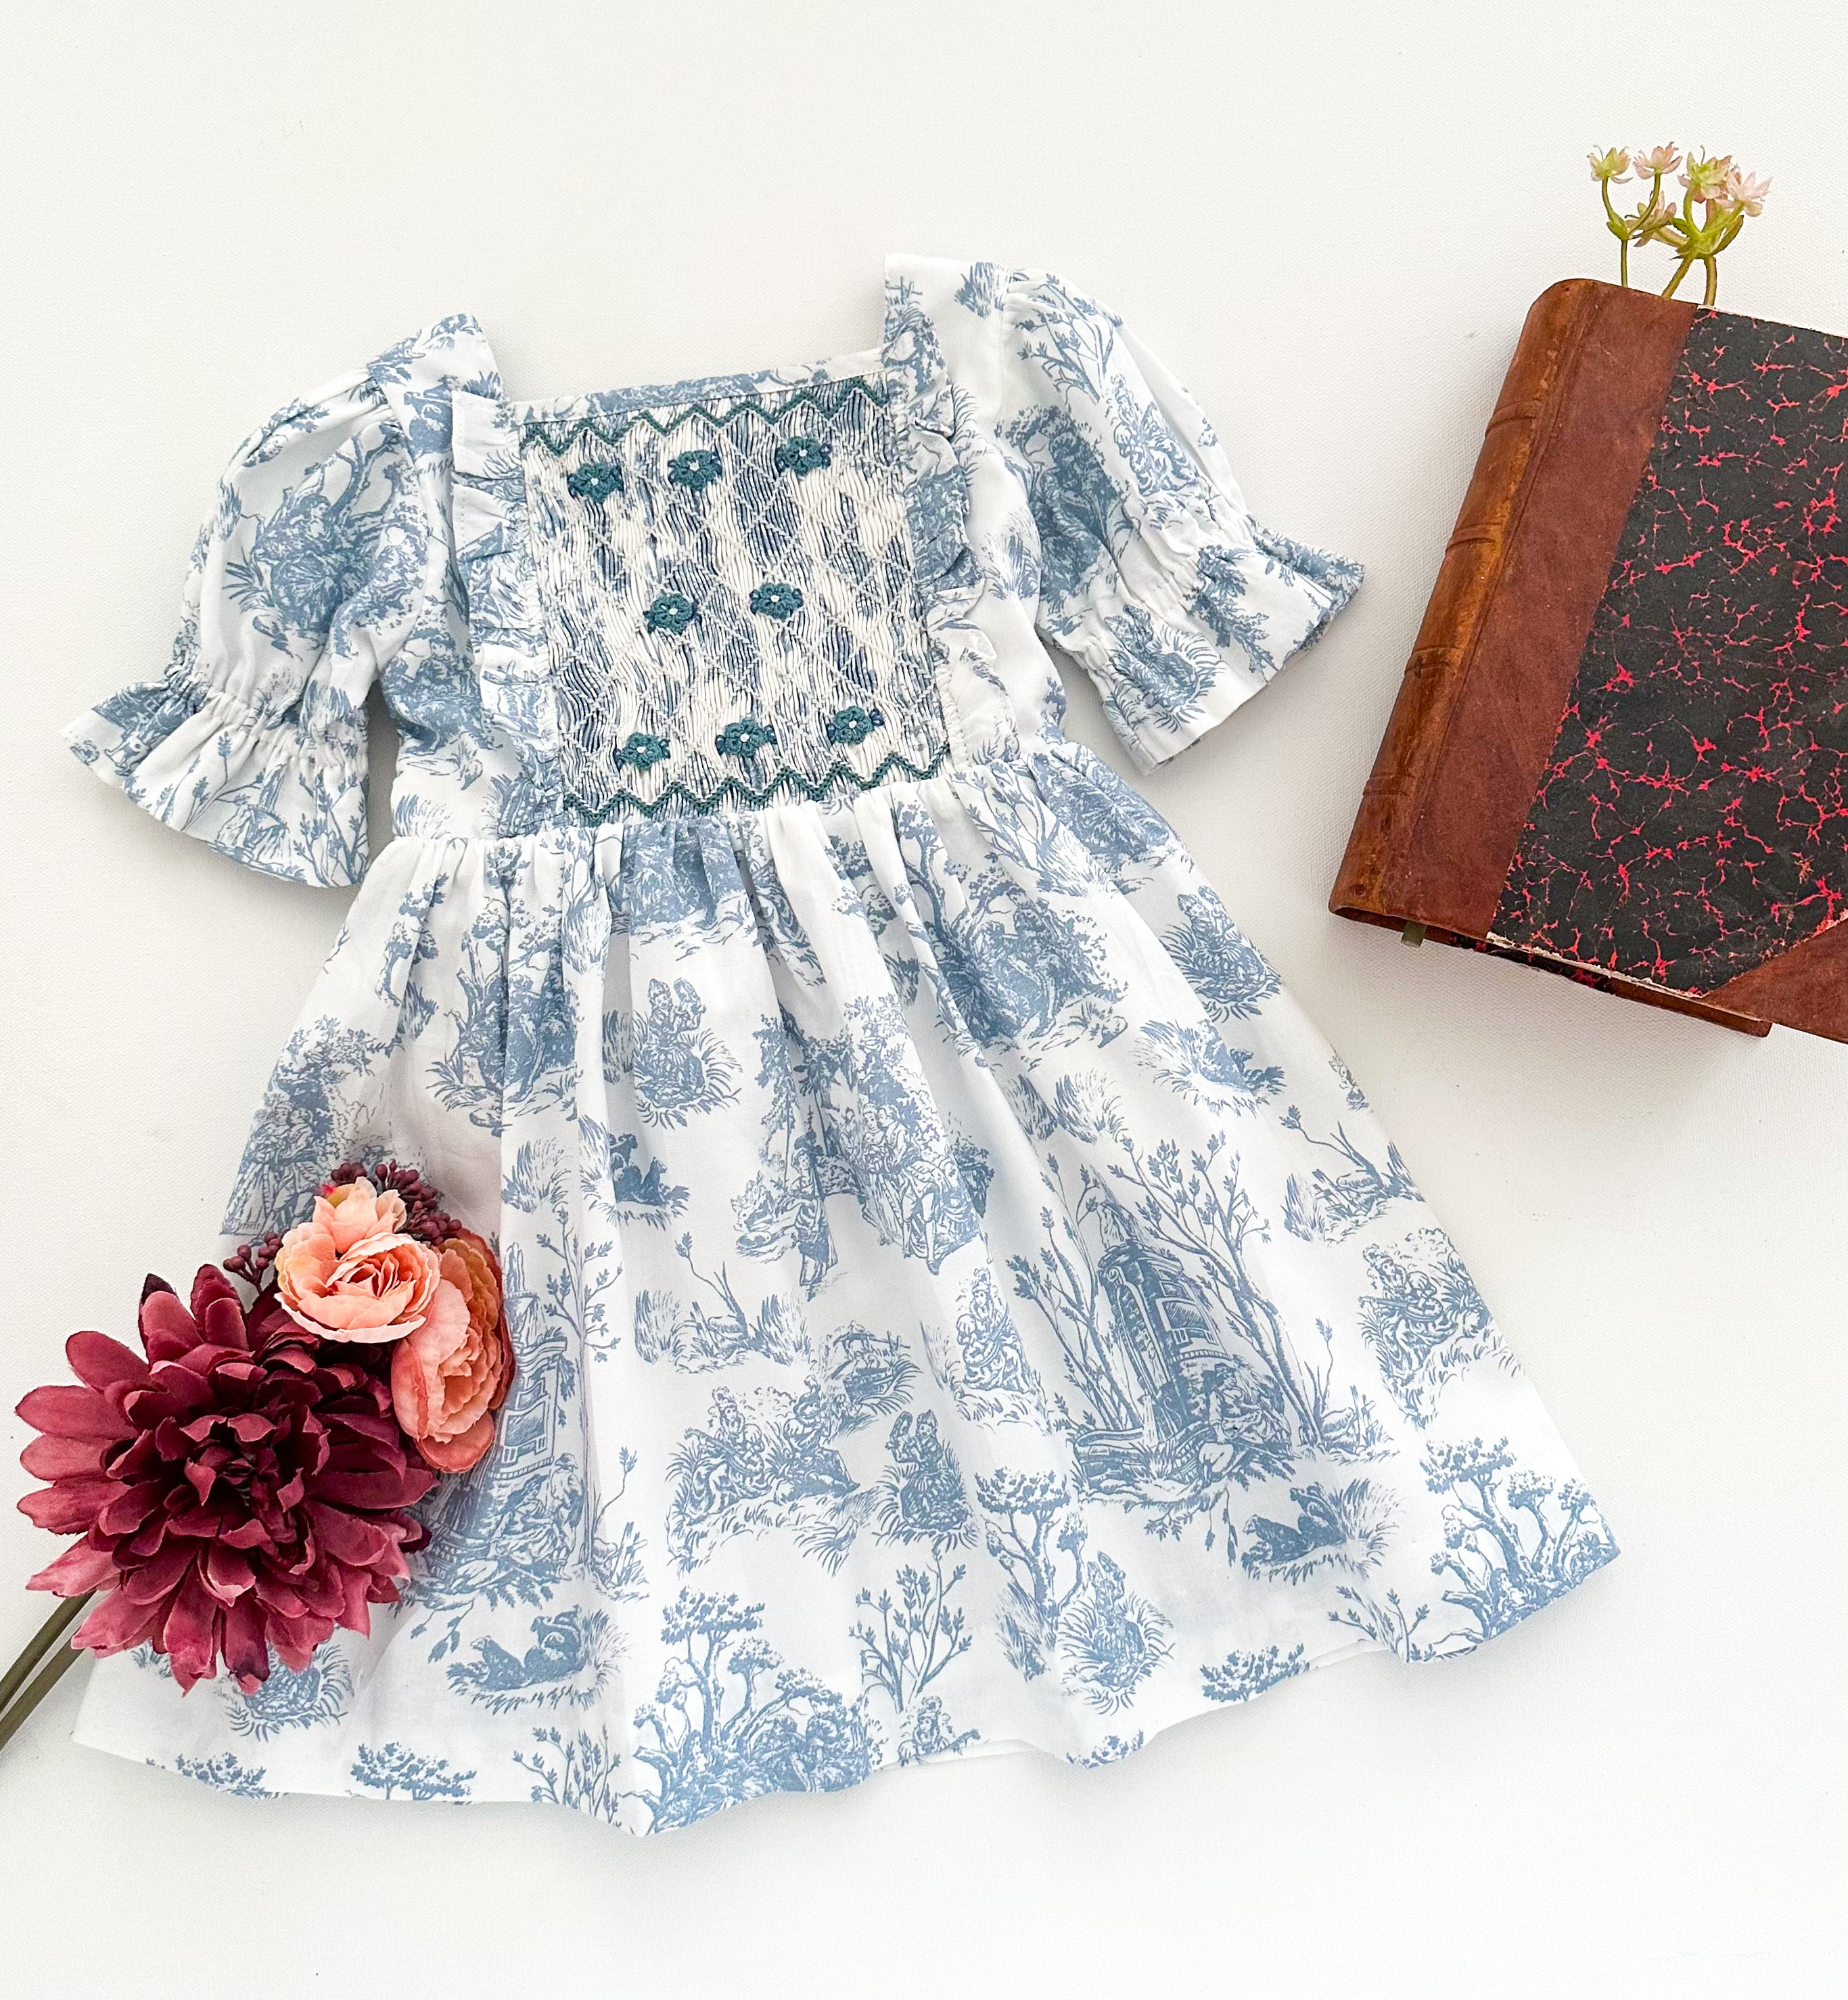 The hand smocked EMILIE dress - Toile De Jouy